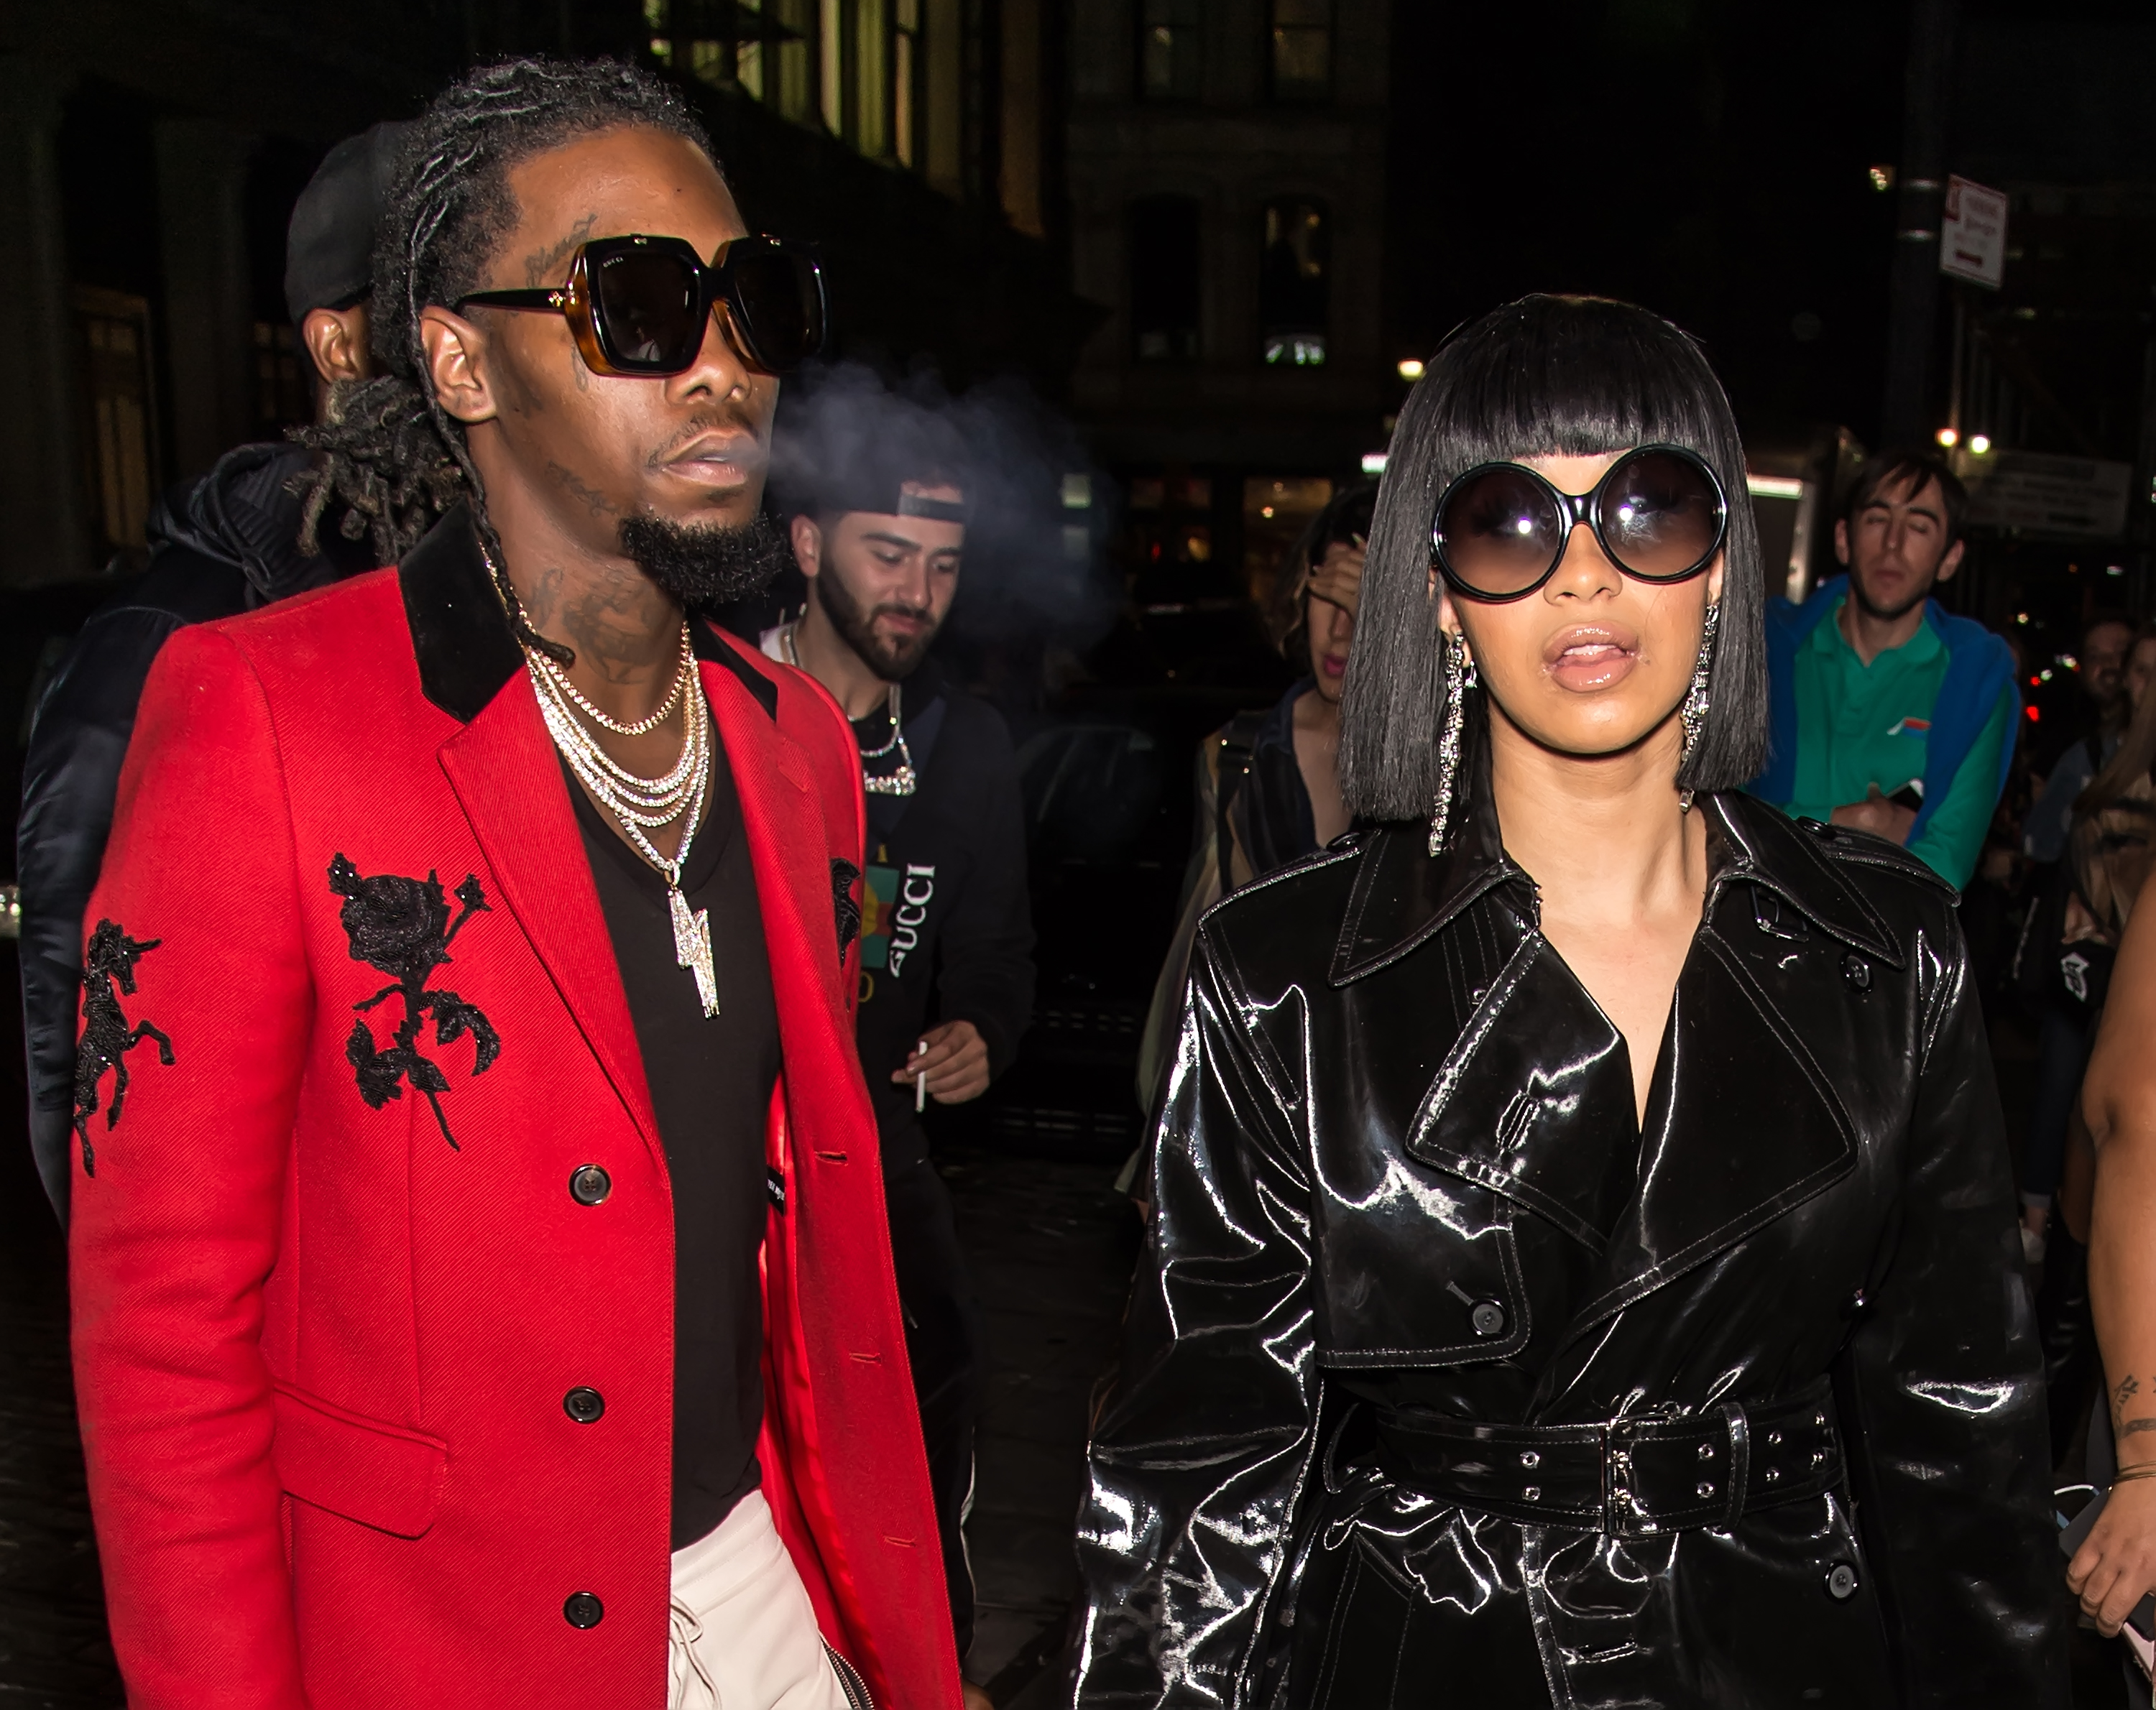 Cardi B Teases Music Video Look & Shows Off Kulture's New Gucci Fur Fashion